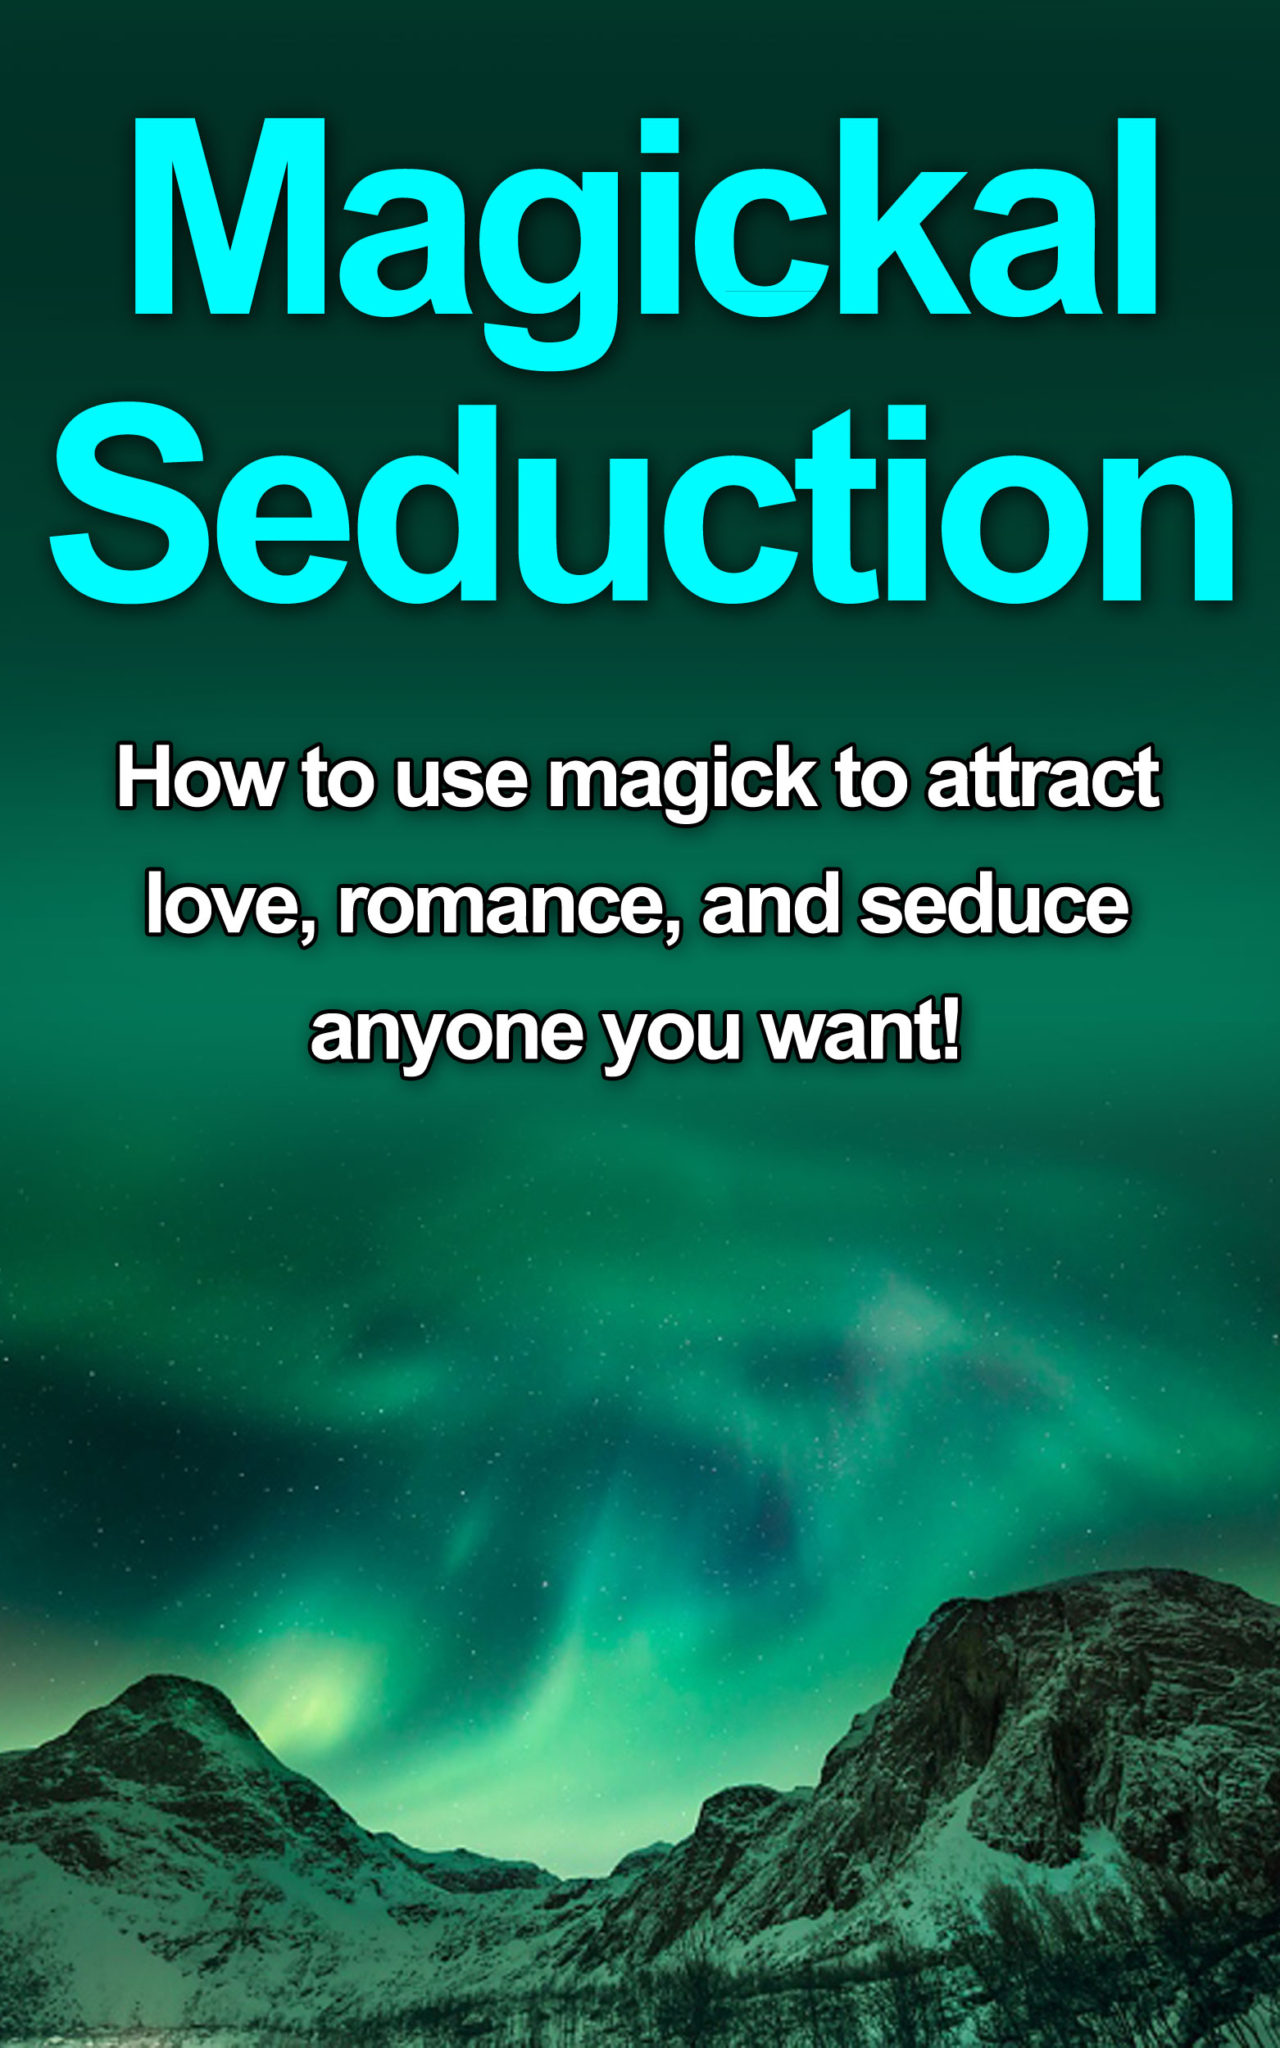 FREE: Magickal Seduction: How to use magick to attract love, romance, and seduce anyone you want! by Damon Thompson